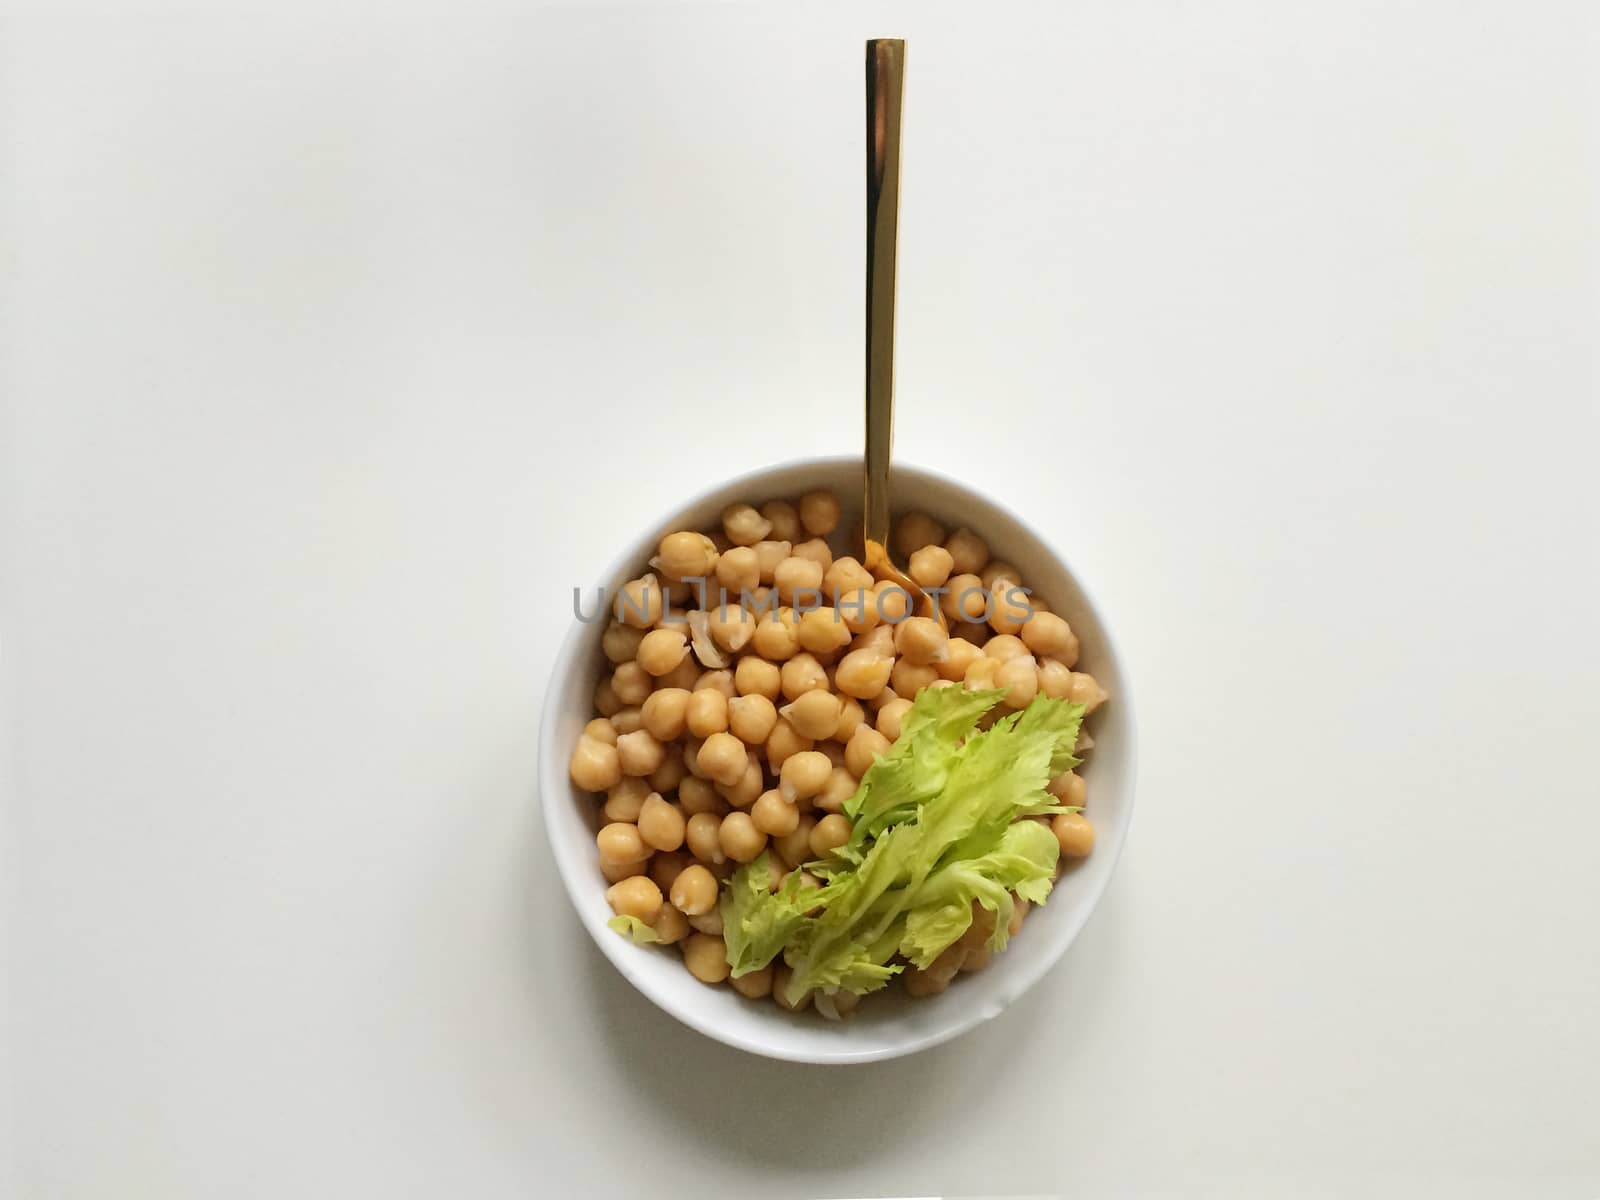 Salad of chickpeas and green celery stalks